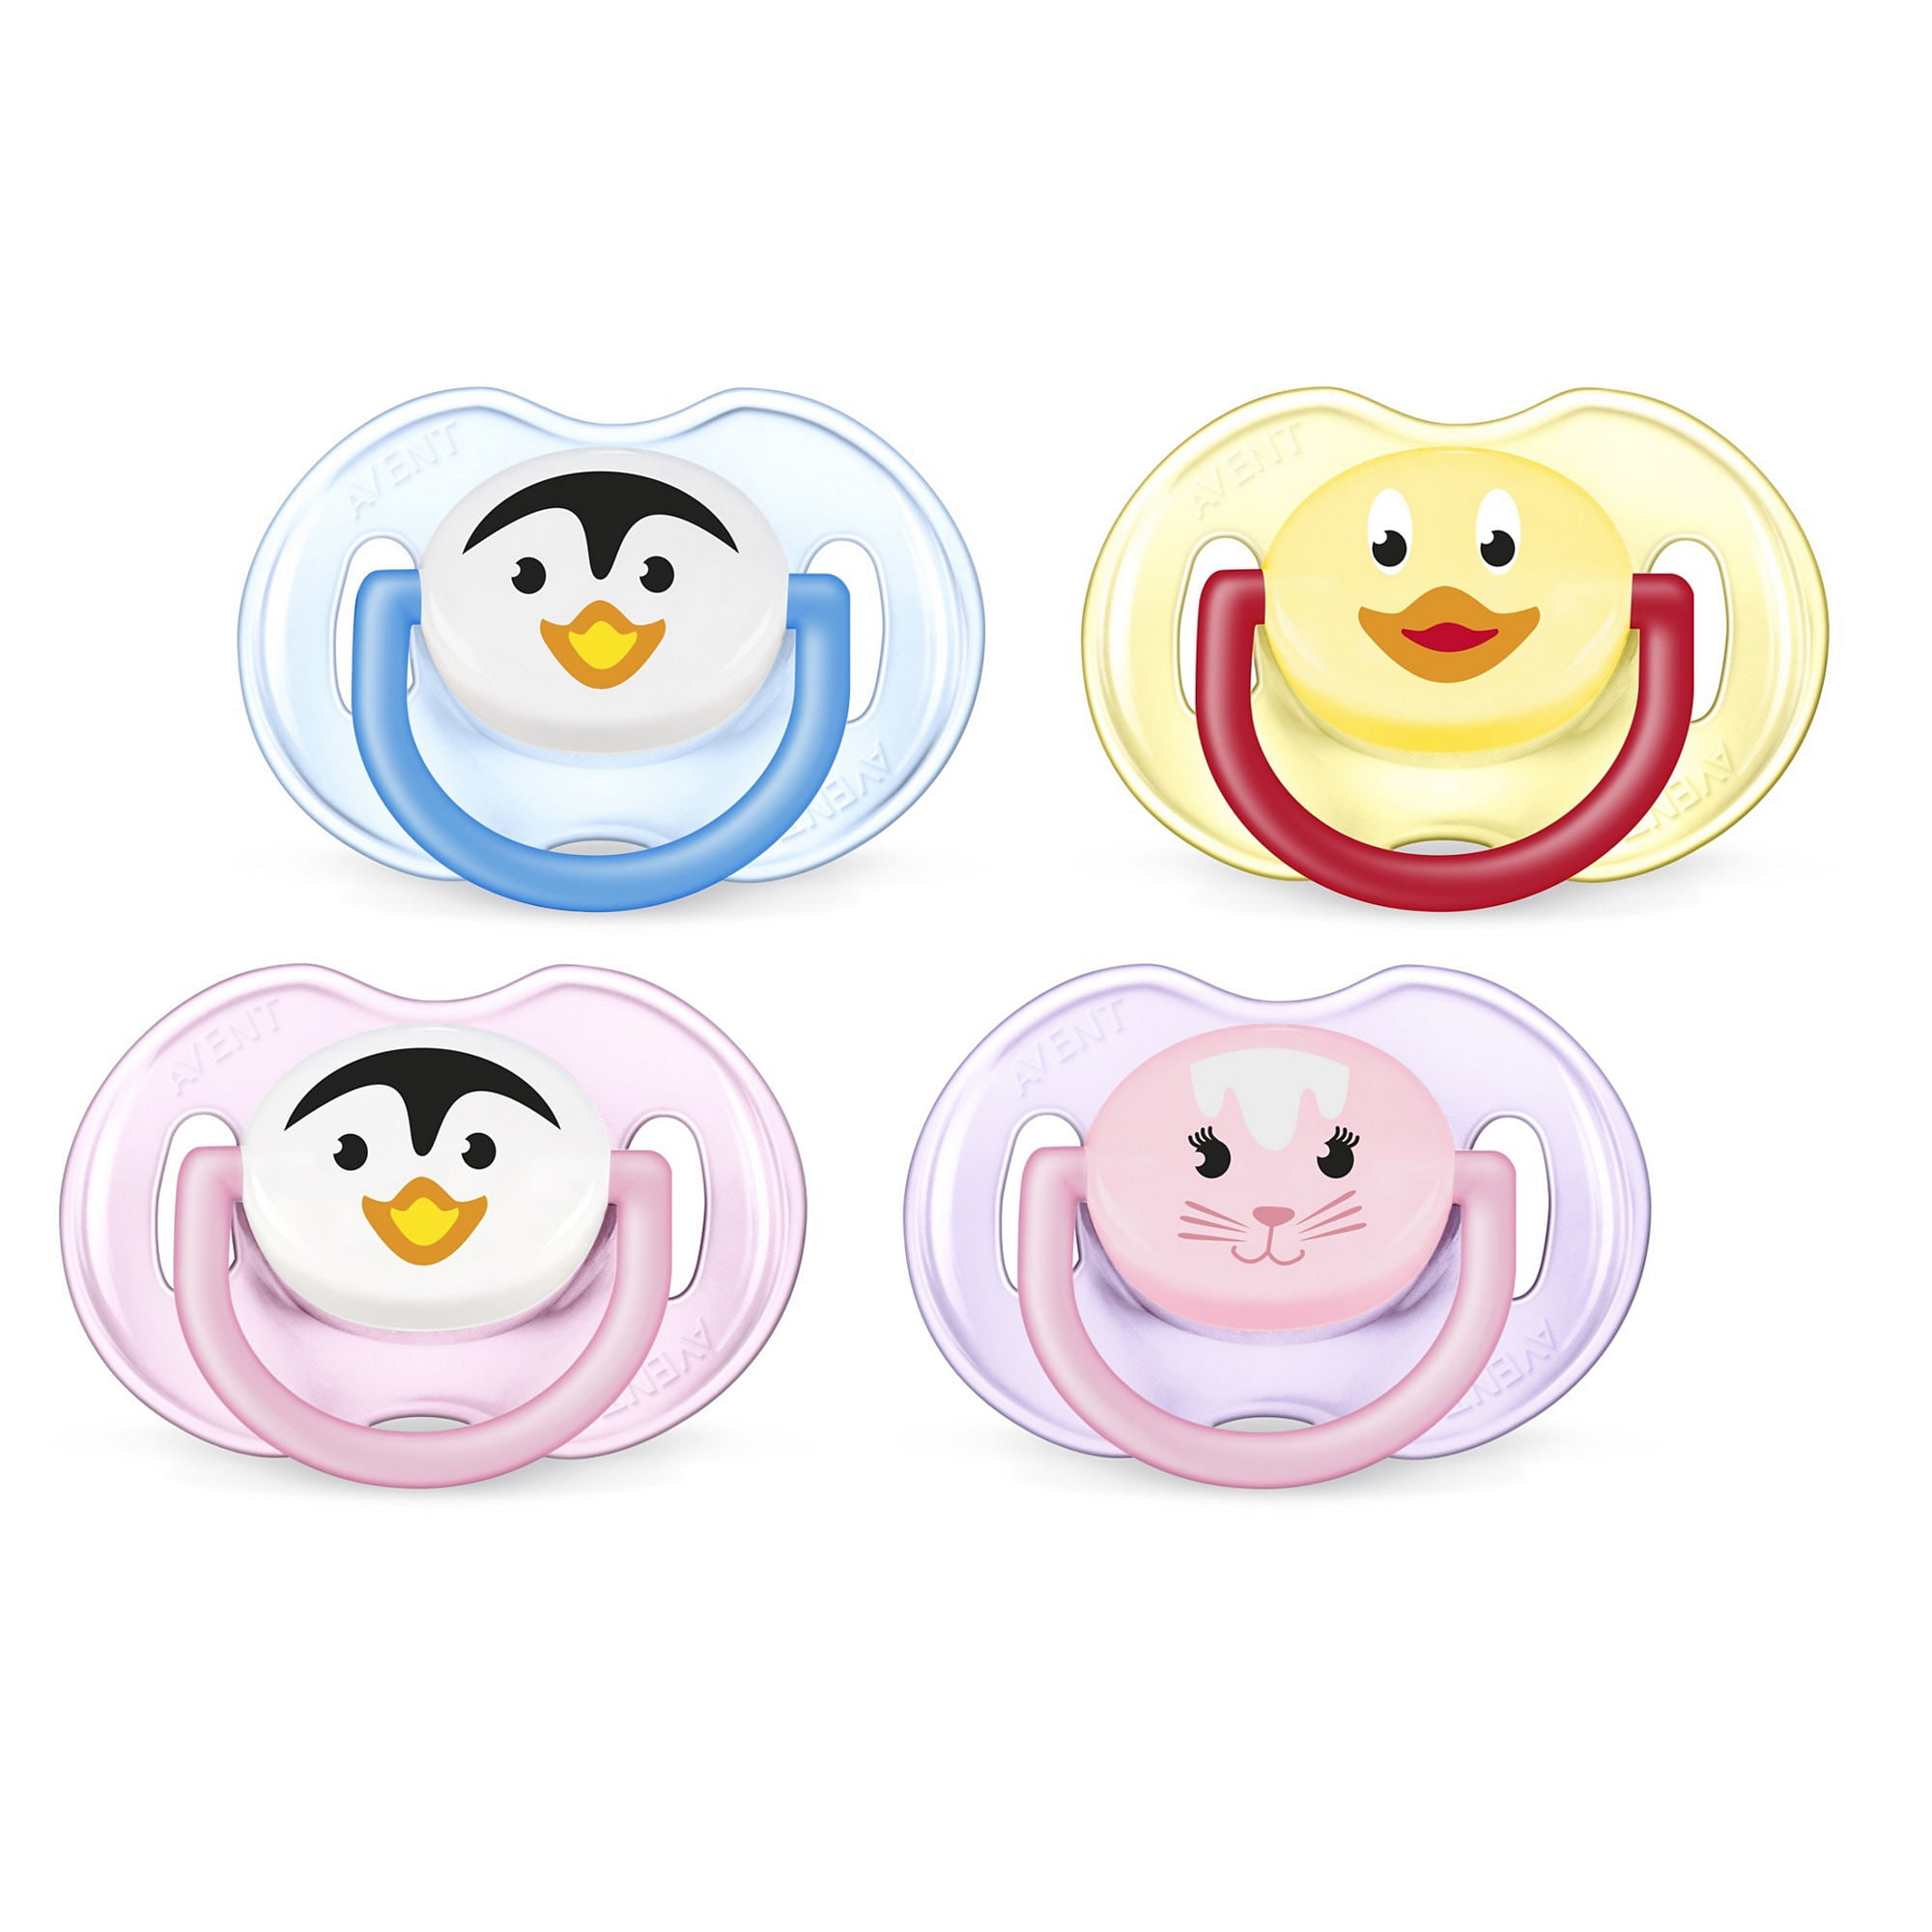 AVENT Baby Boys Girls Orthodontic Soother Dummy Pack of 2 Animals 0-6 Months